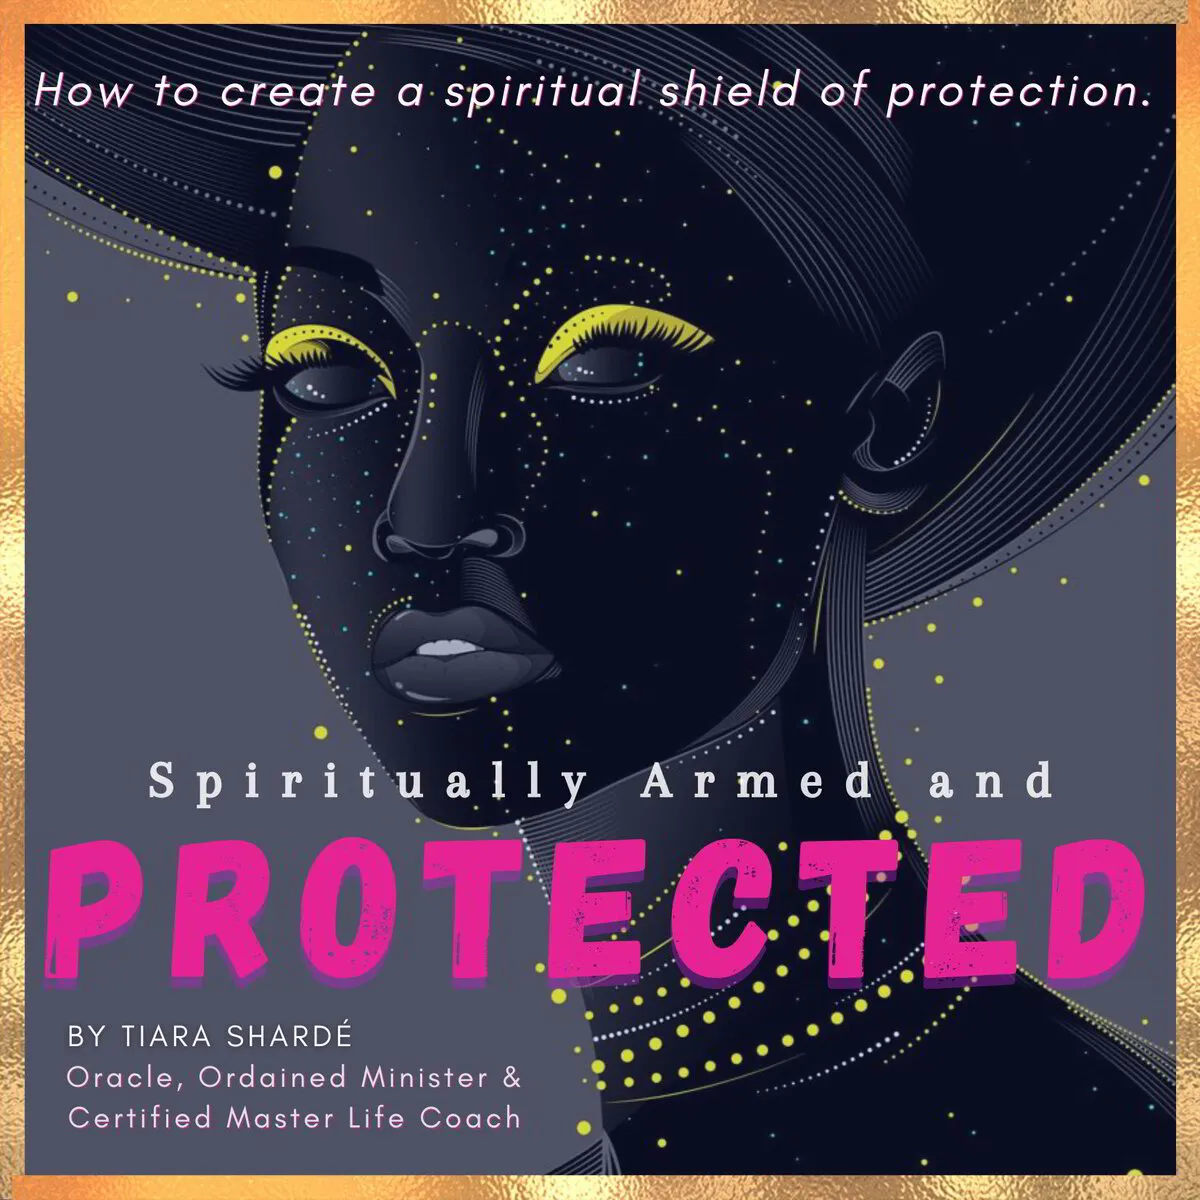 spiritually armed and protected ebook, Spiritual mentor, oracle and healer, Tiara Shardé. Coaching program, embodying the goddess, the pussy portal